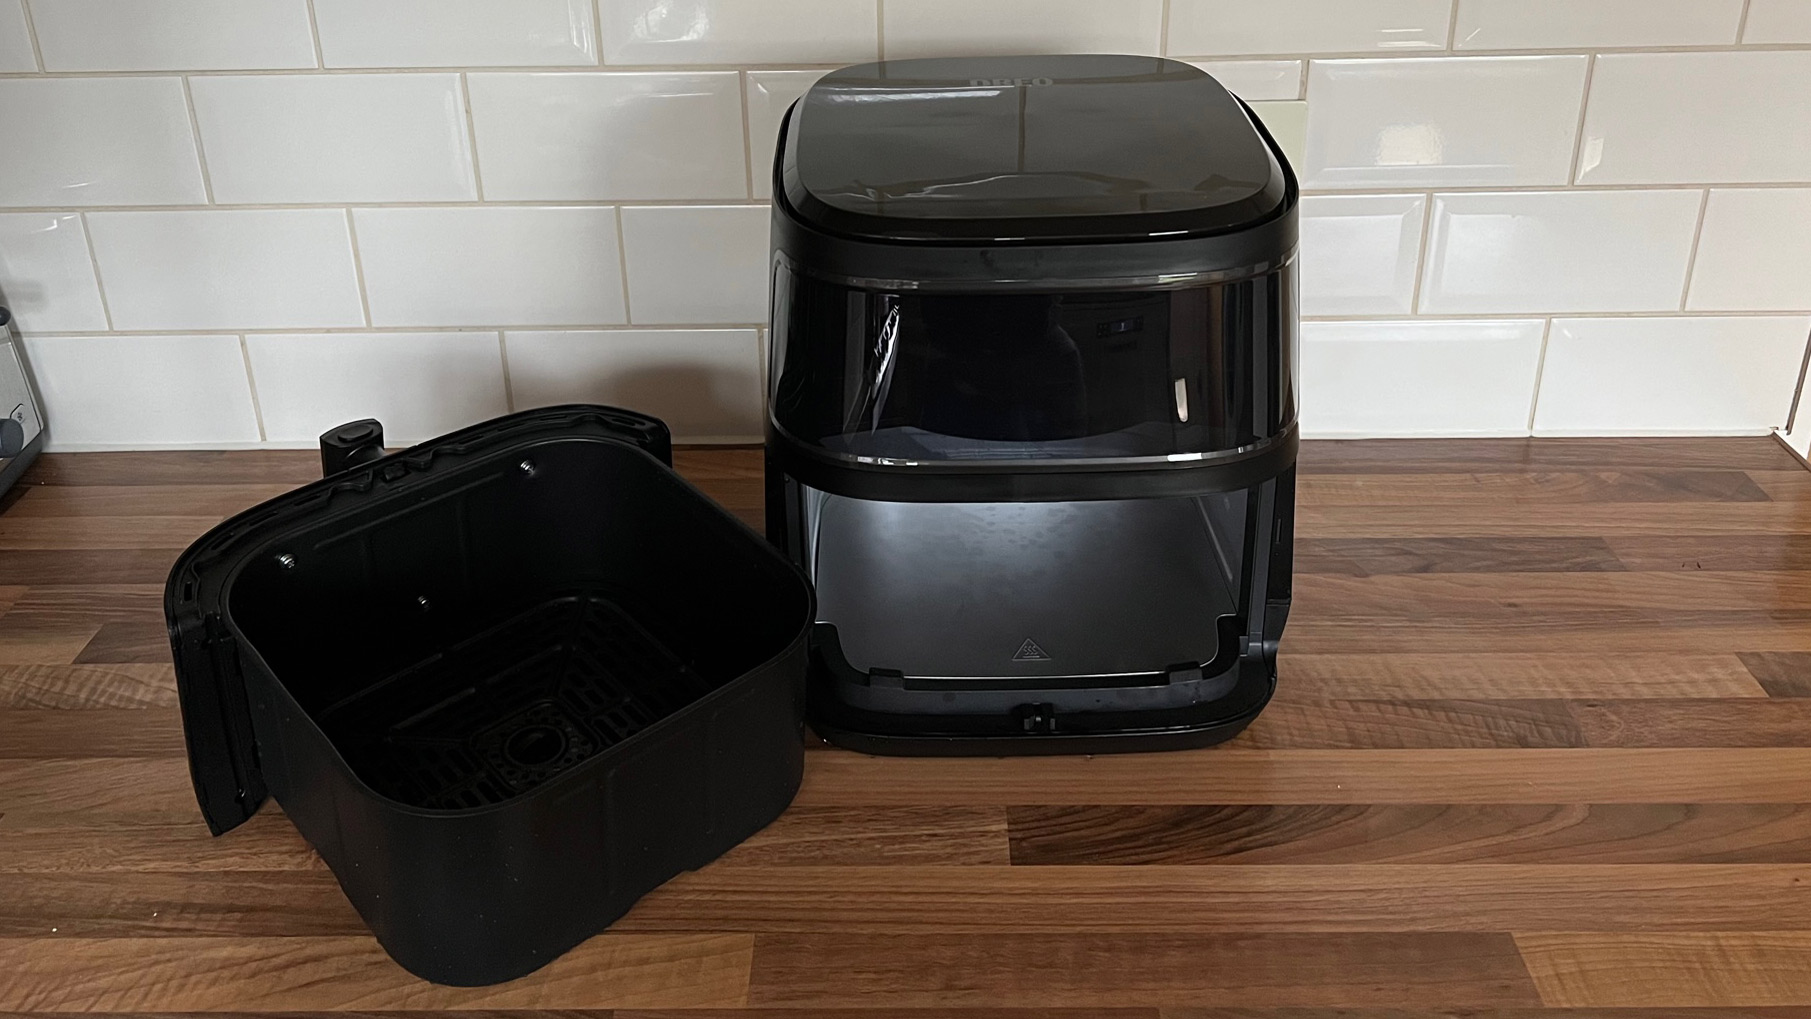 The Dreo 6-Quart Air Fryer with the frying basket removed